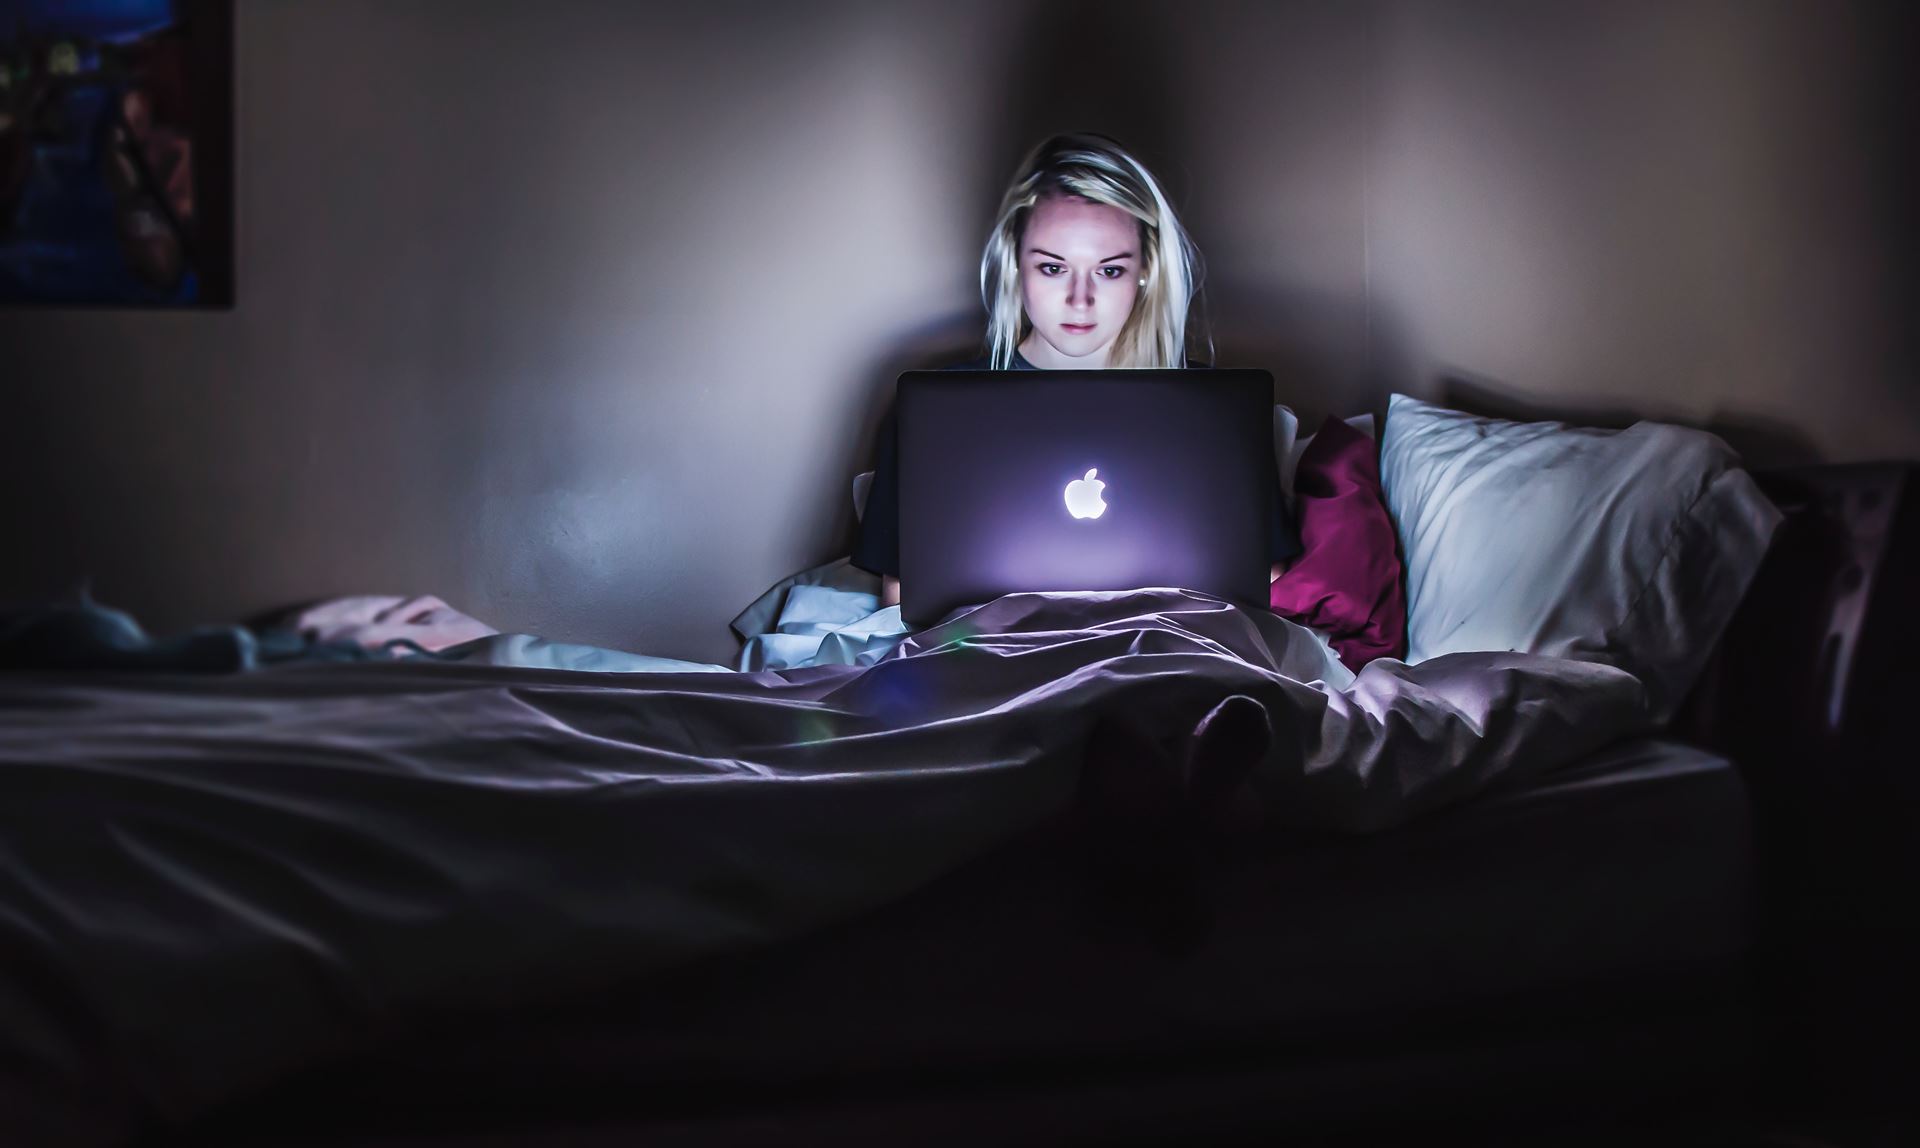 A female-presenting person sitting up in bed on a Macbook laptop. The room is dark, indicating that it is nighttime, with the only light coming from the laptop.